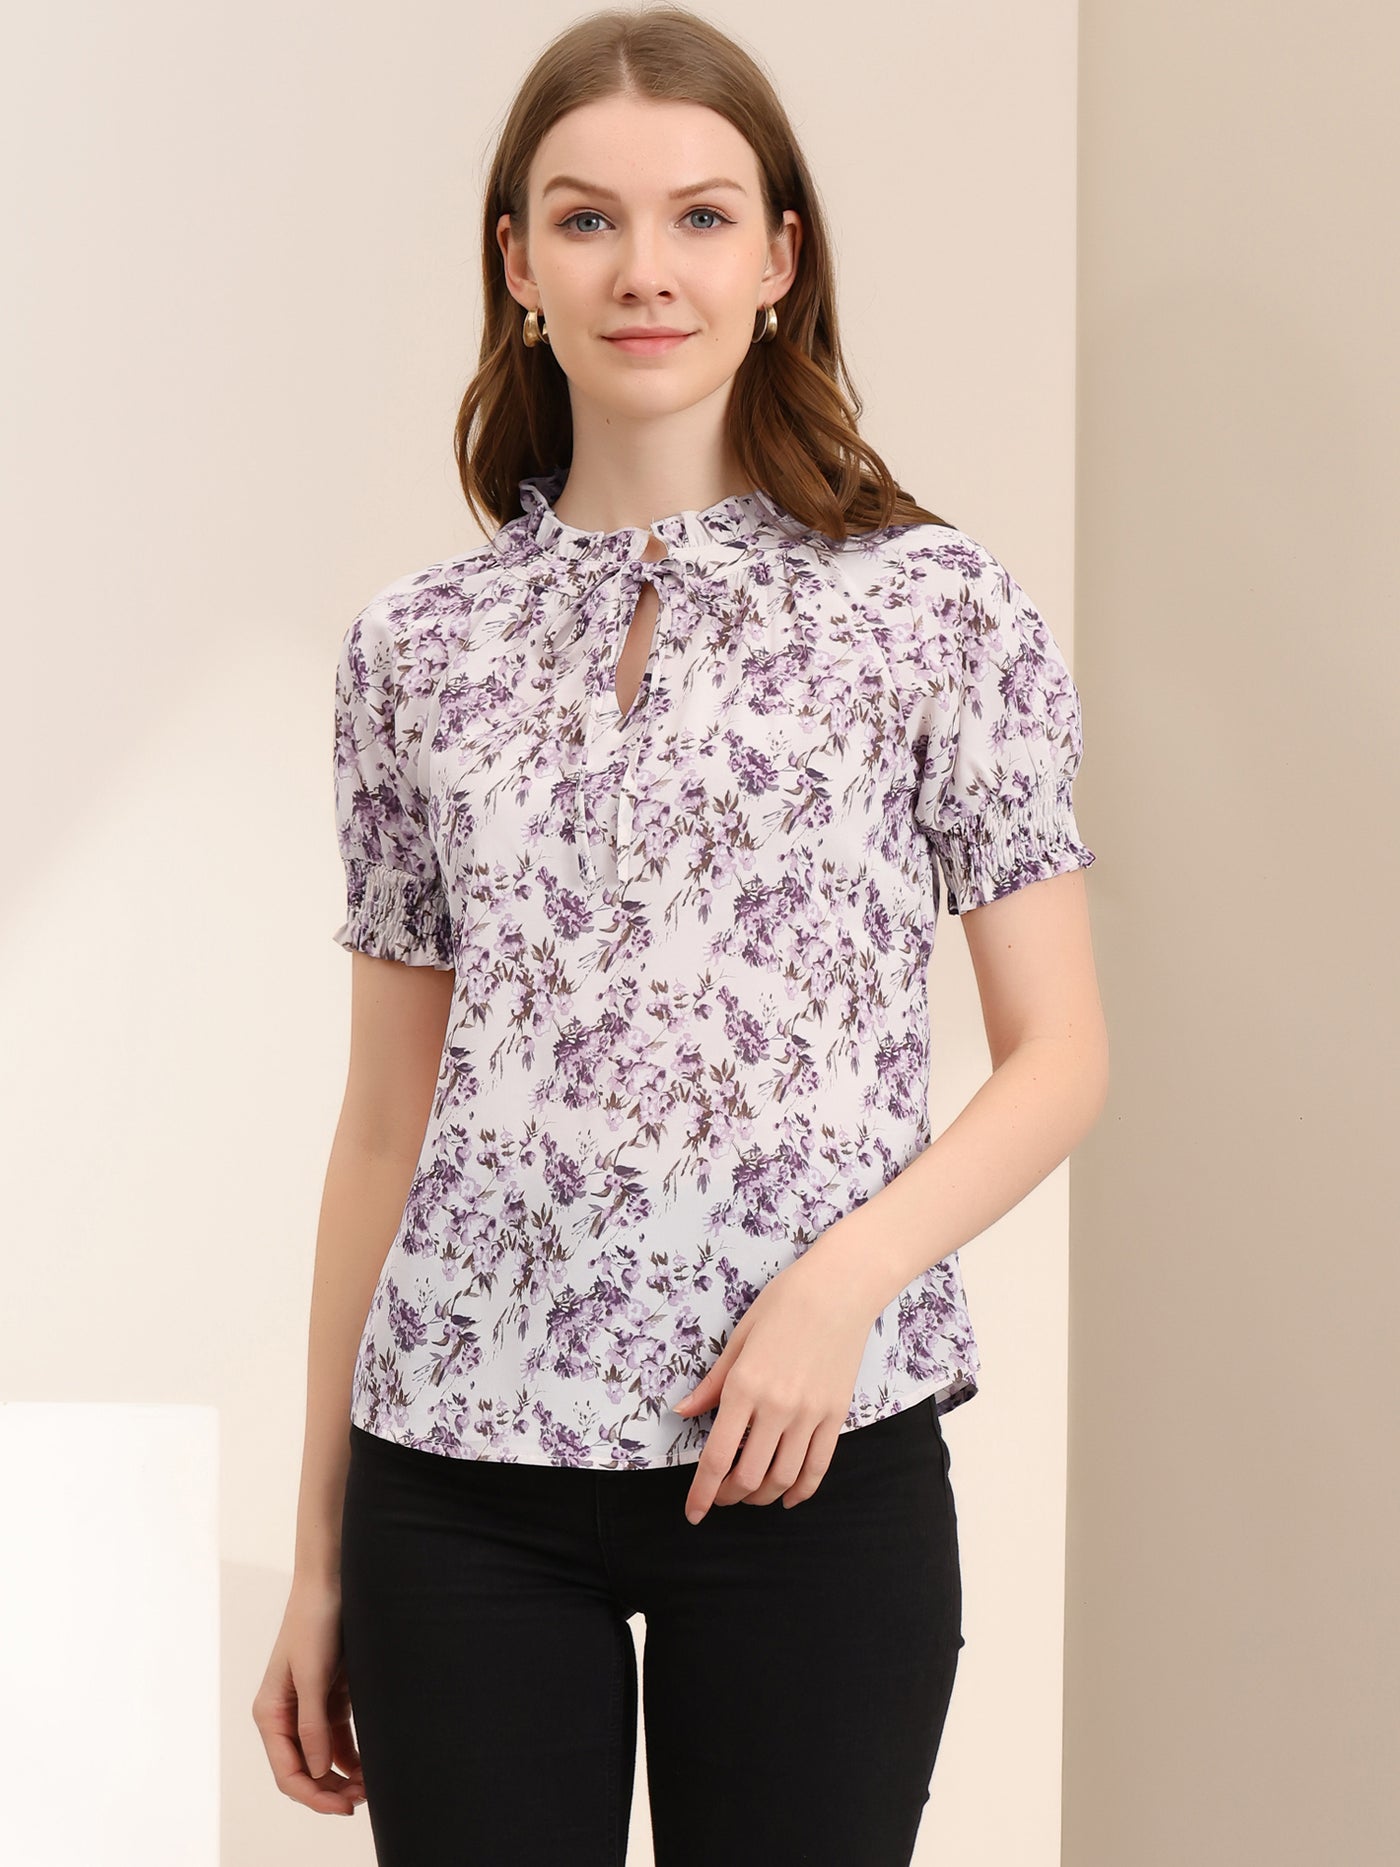 Allegra K Ruffle Tie V Neck Casual Smocked Short Sleeve Floral Top Blouse